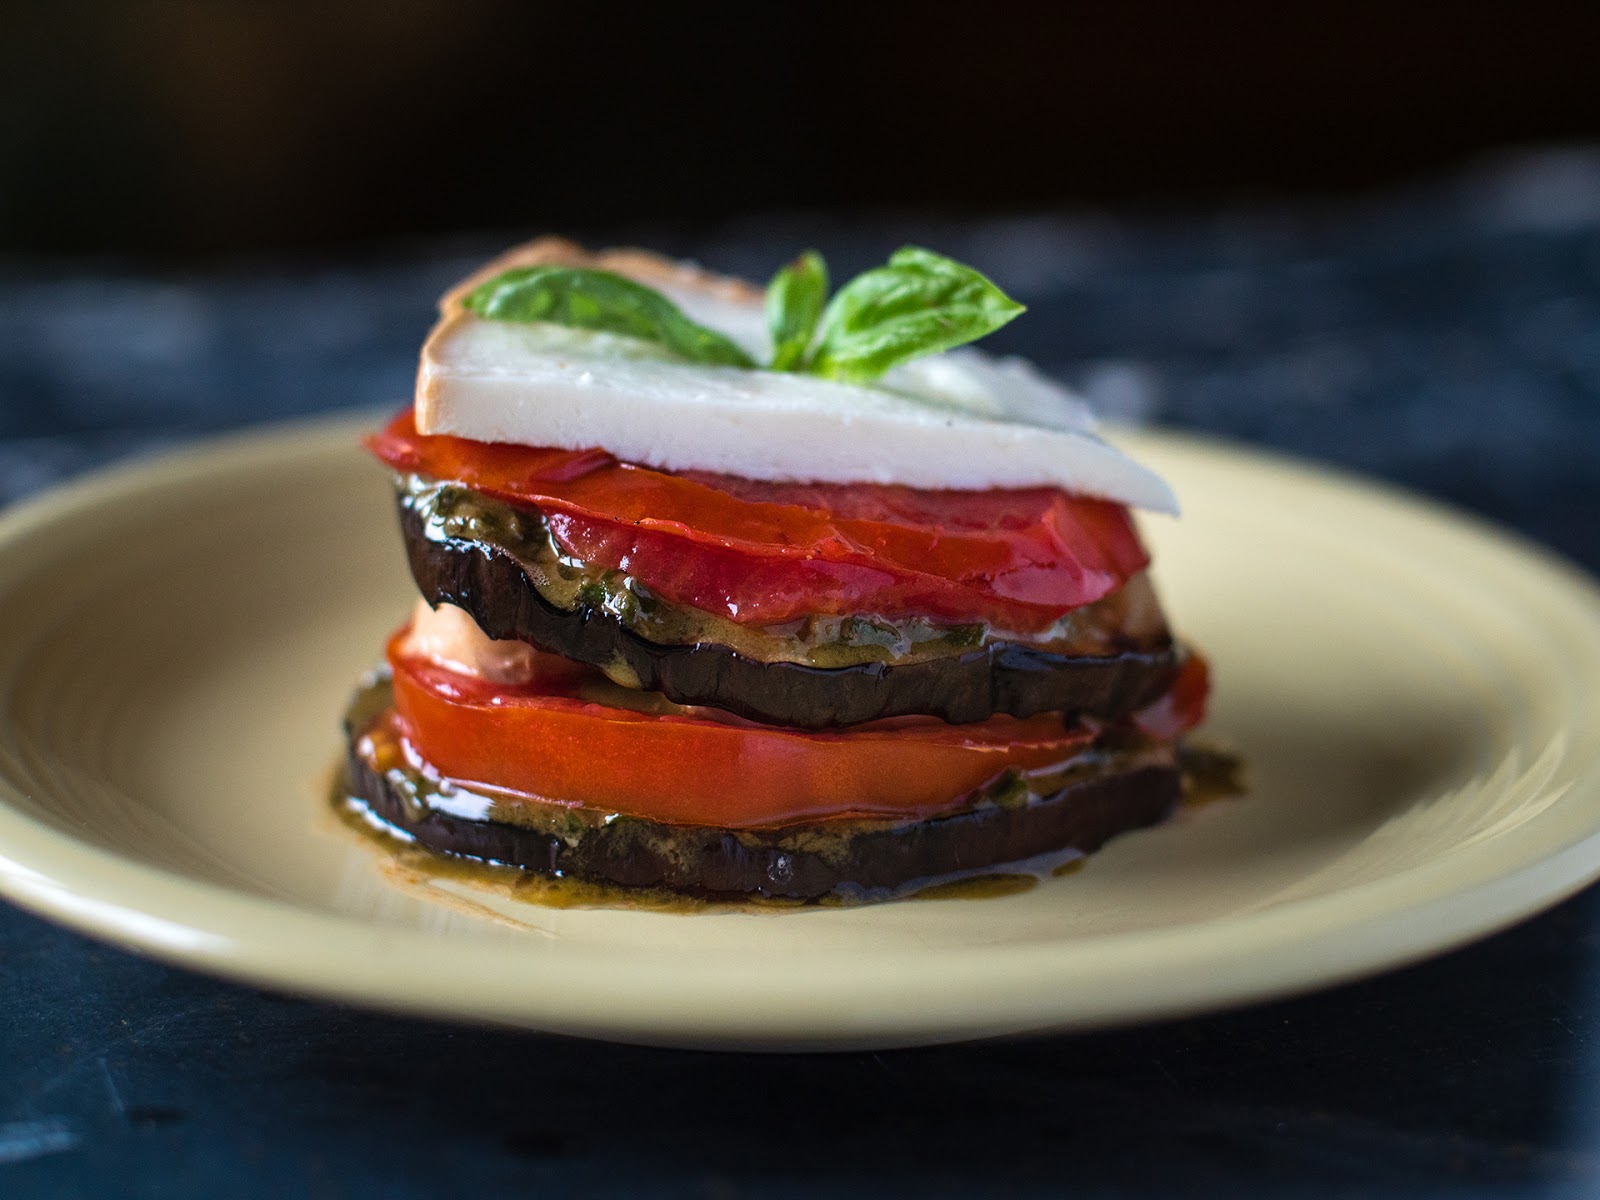 Grilled Eggplant and Tomato Stacks with Mozzarella and Pesto | Local Food Rocks